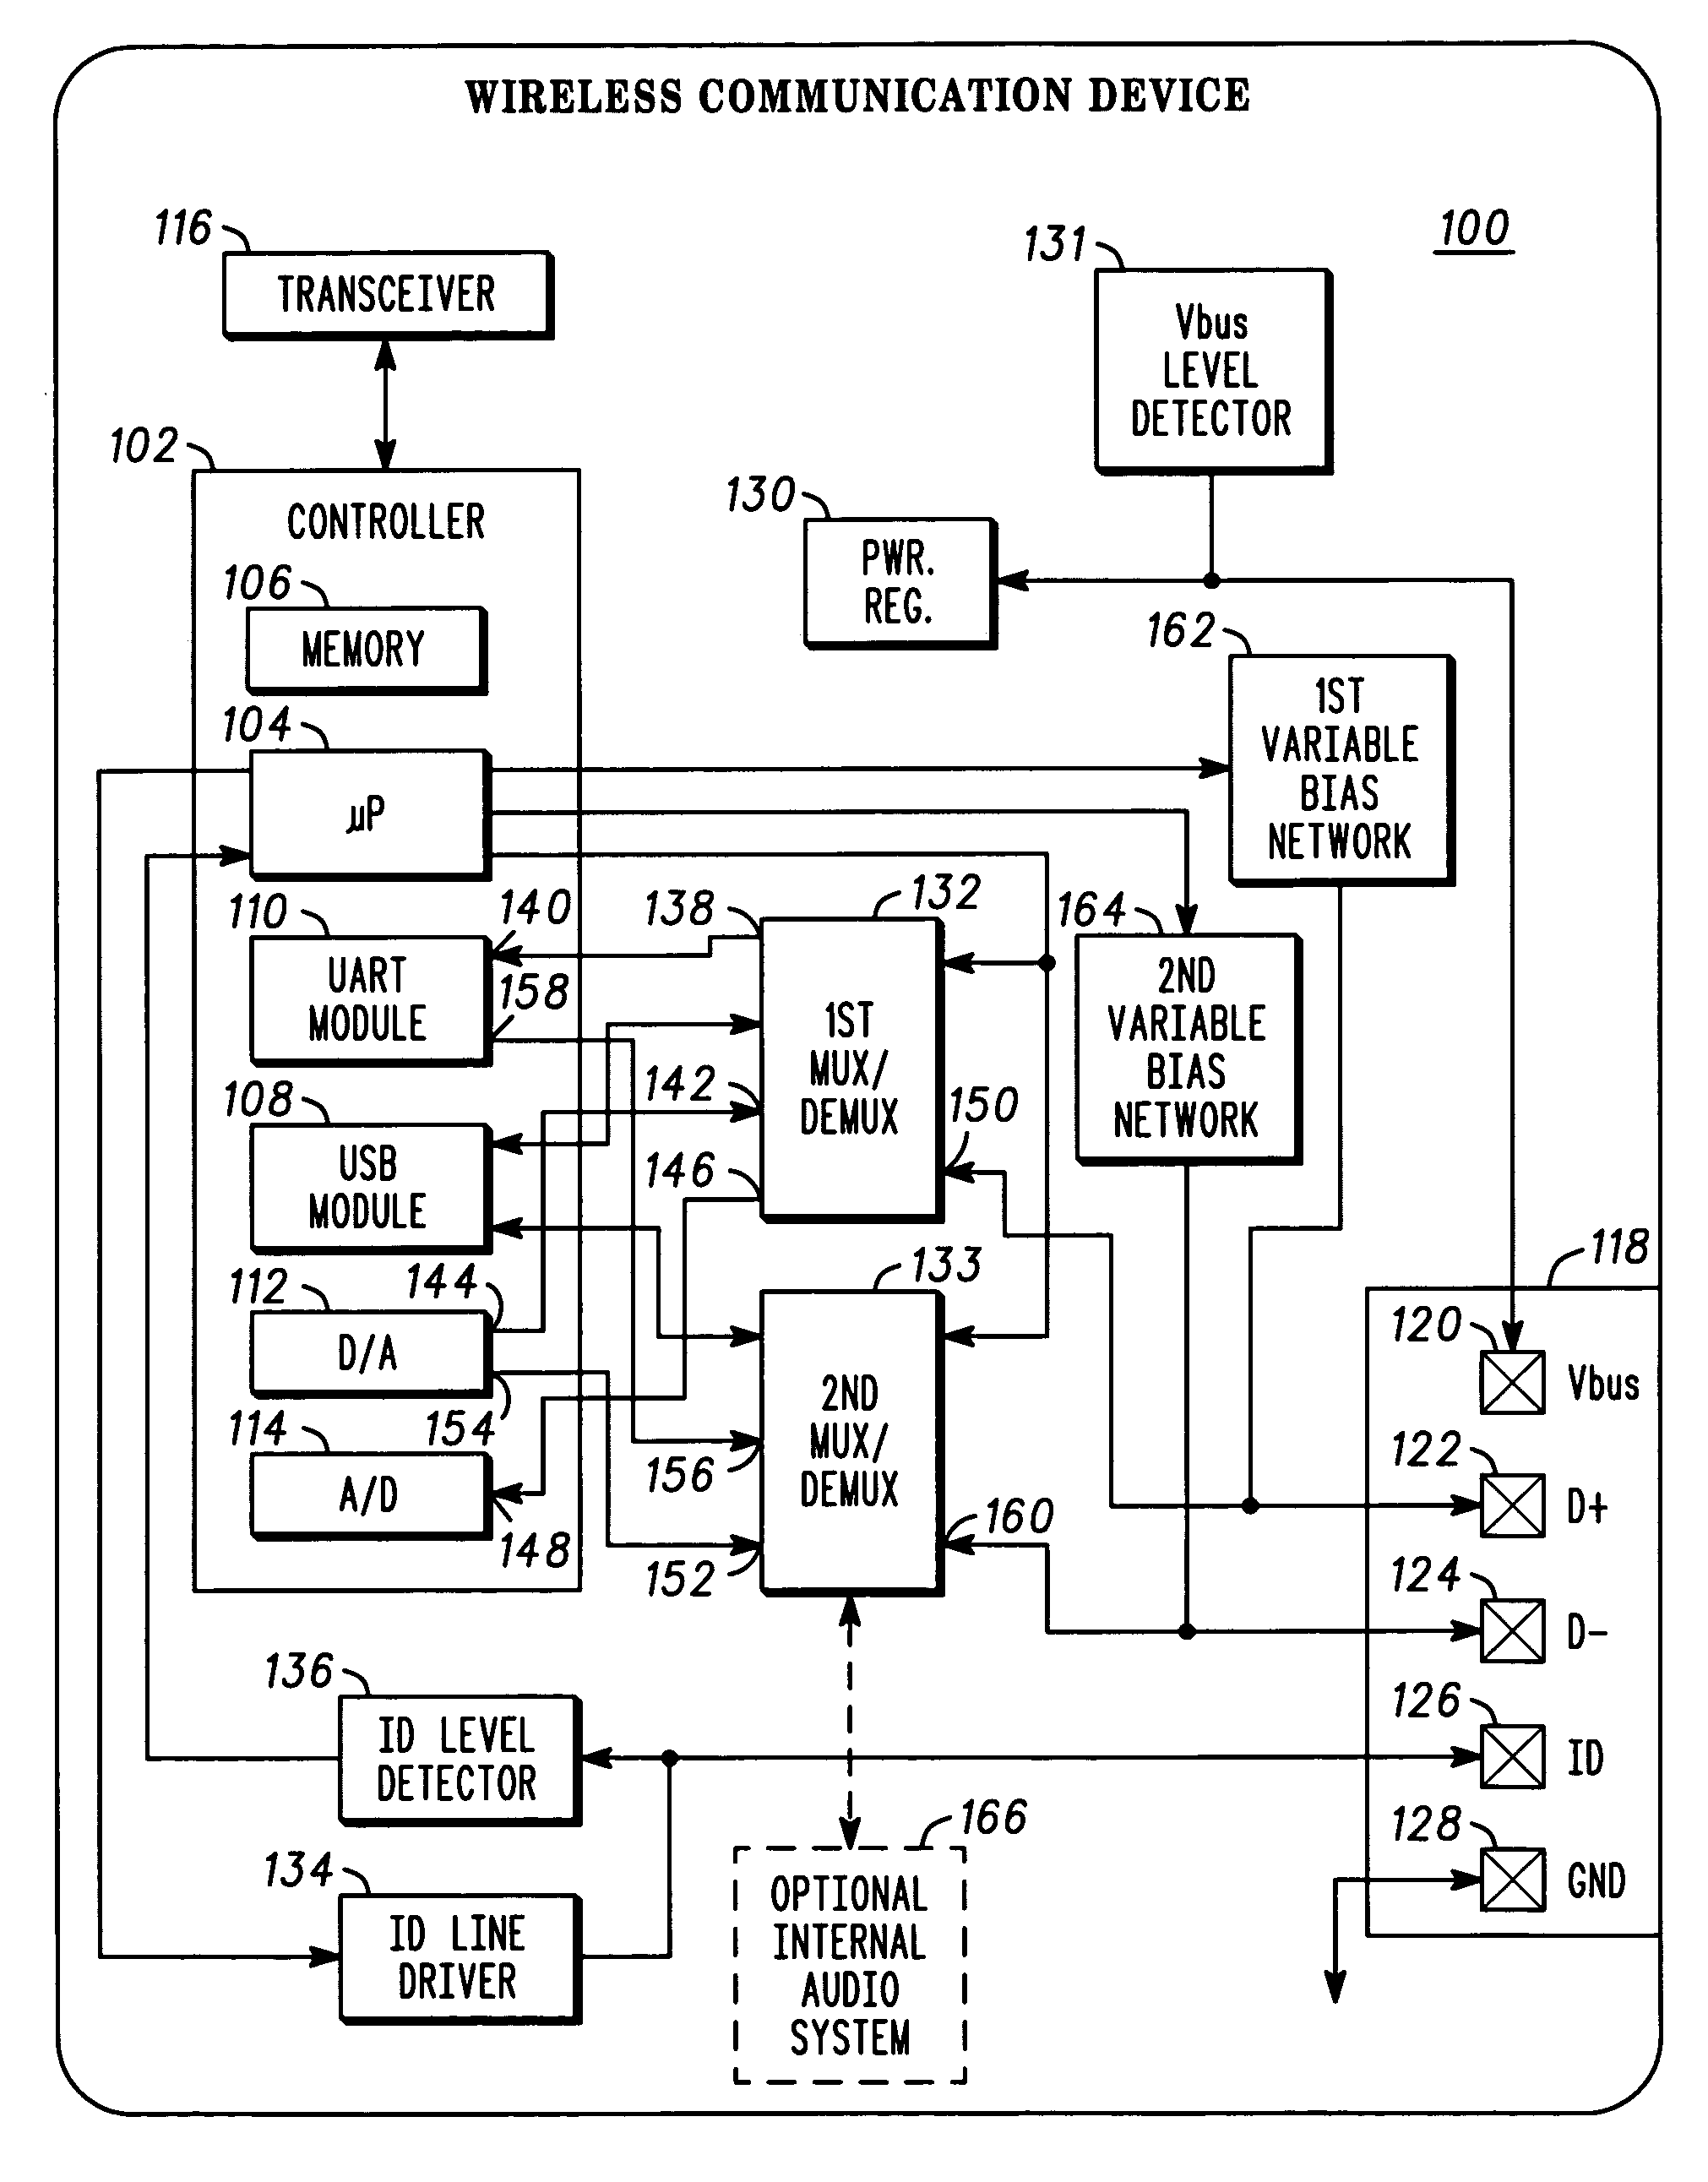 Electronic apparatus and system with multi-purpose interface